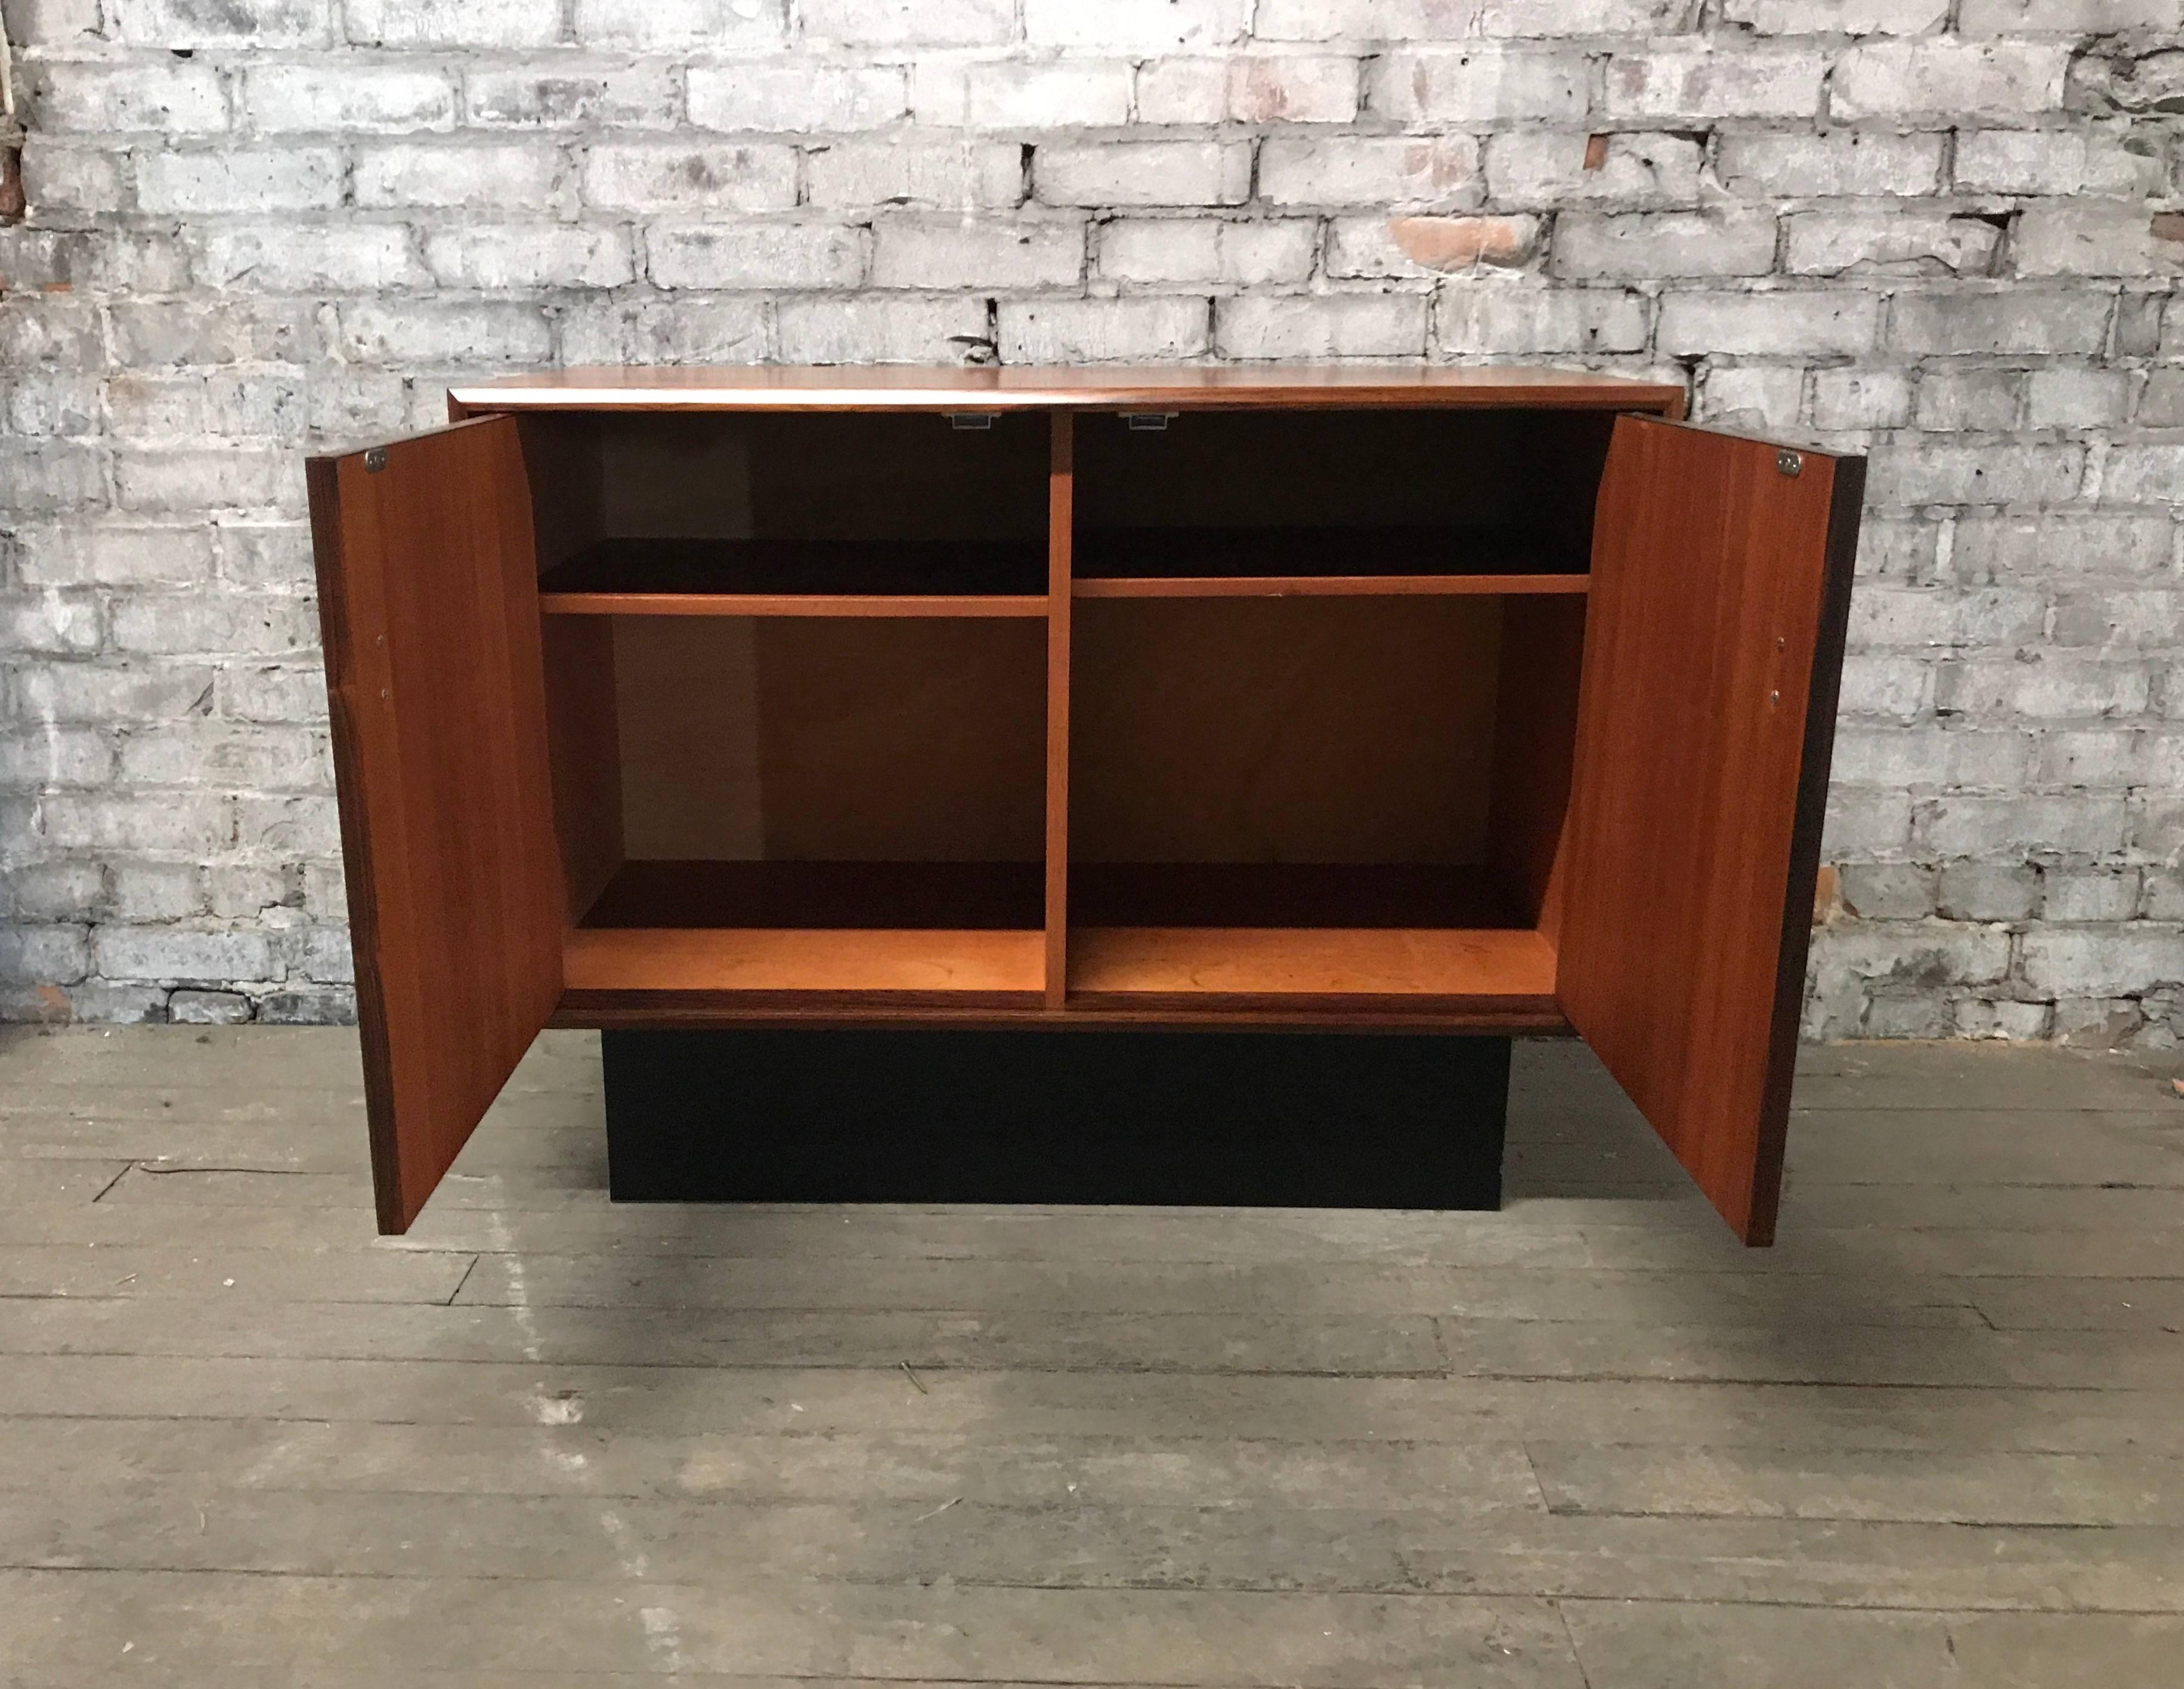 Danish Modern rosewood cabinet in the manner of Poul Hundevad, Stunning, richly grained bookmatched rosewood, black lacquered plinth, chromed detailed hand pulls, two doors and two adjustable shelves, with generous storage, hand delivery available